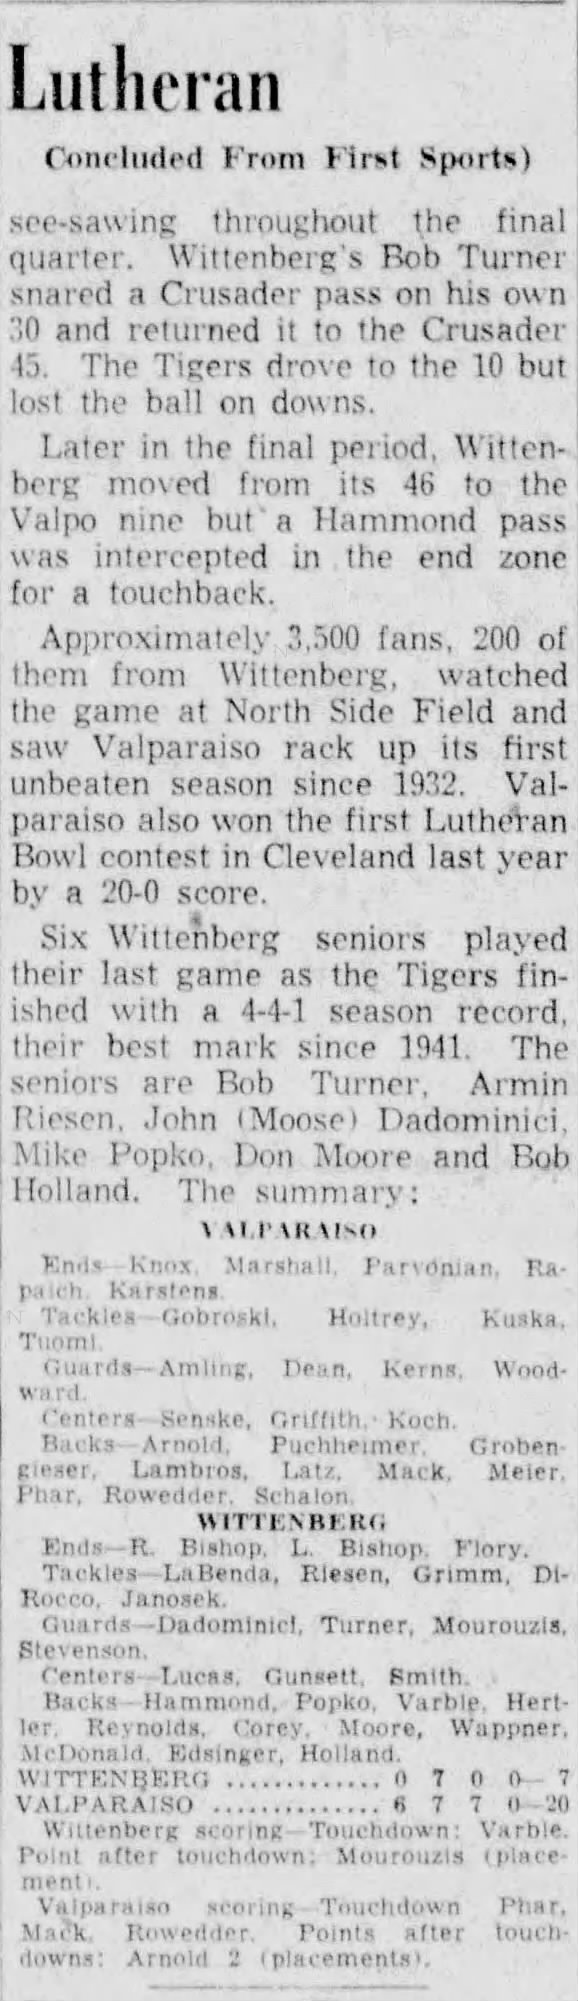 1950 Lutheran Bowl Mention of North Side Field